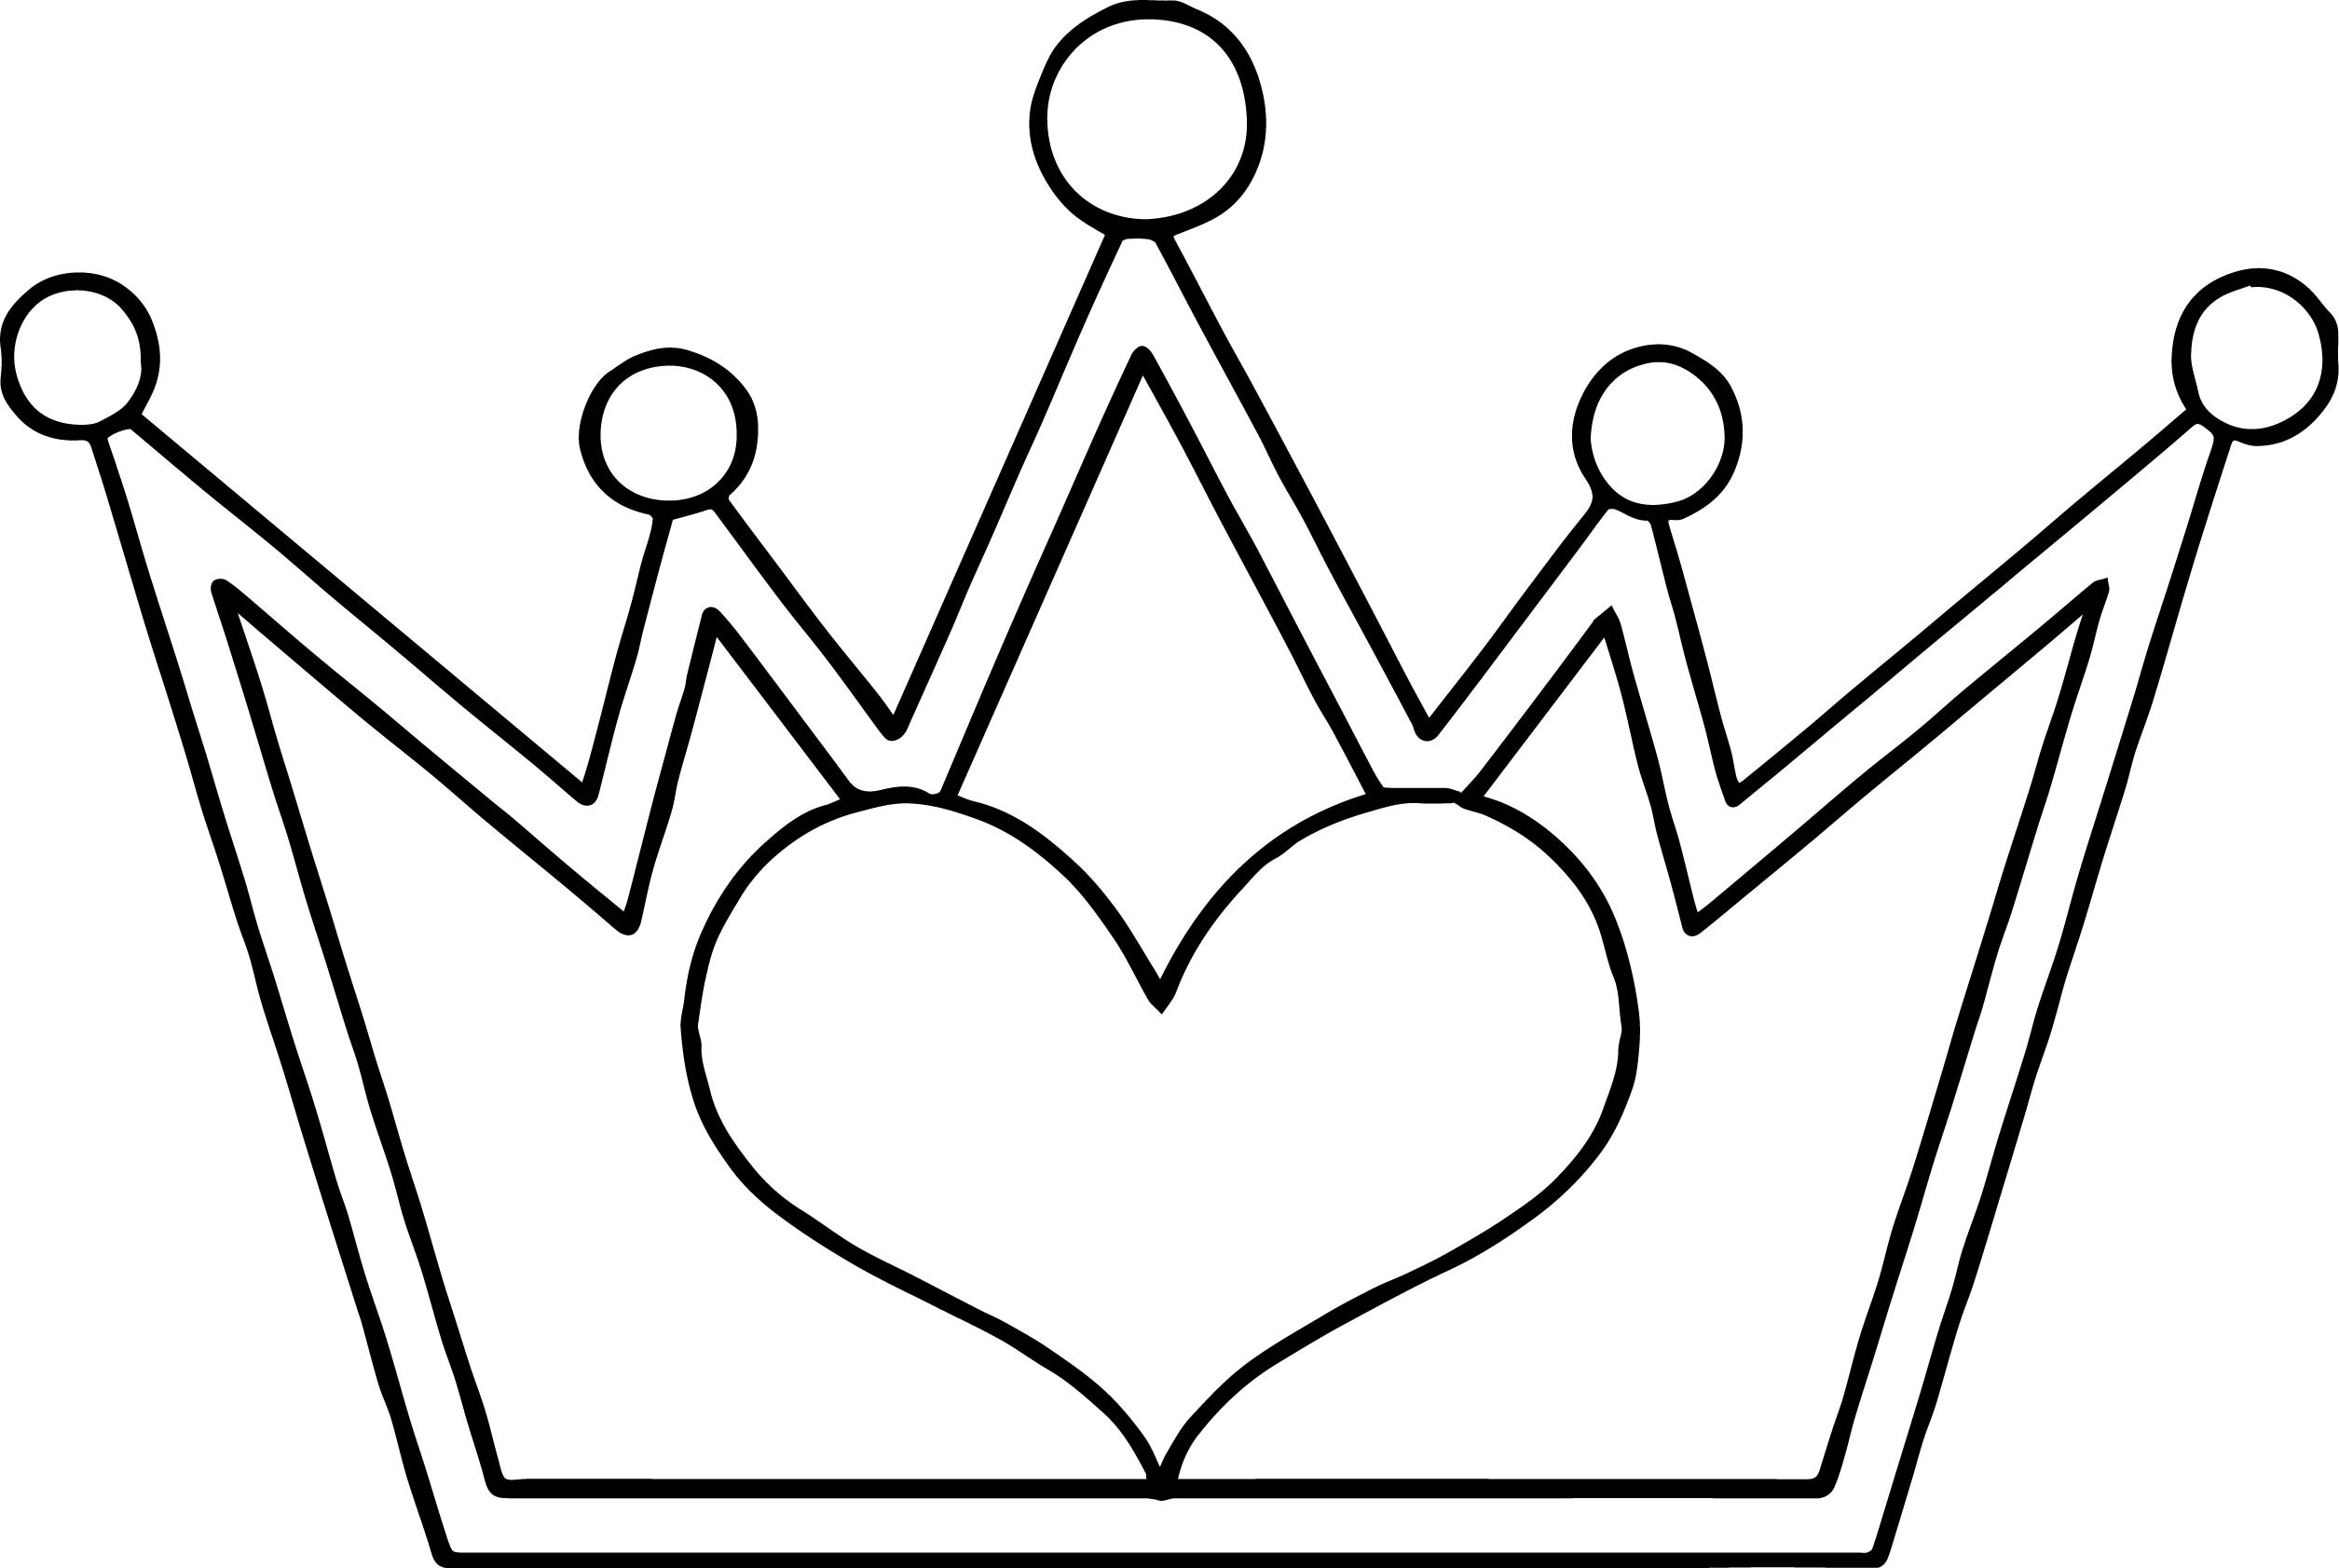 Queen Crown Coloring Pages For Teens
 Shopkins Crown Coloring Pages Collections Shopkins